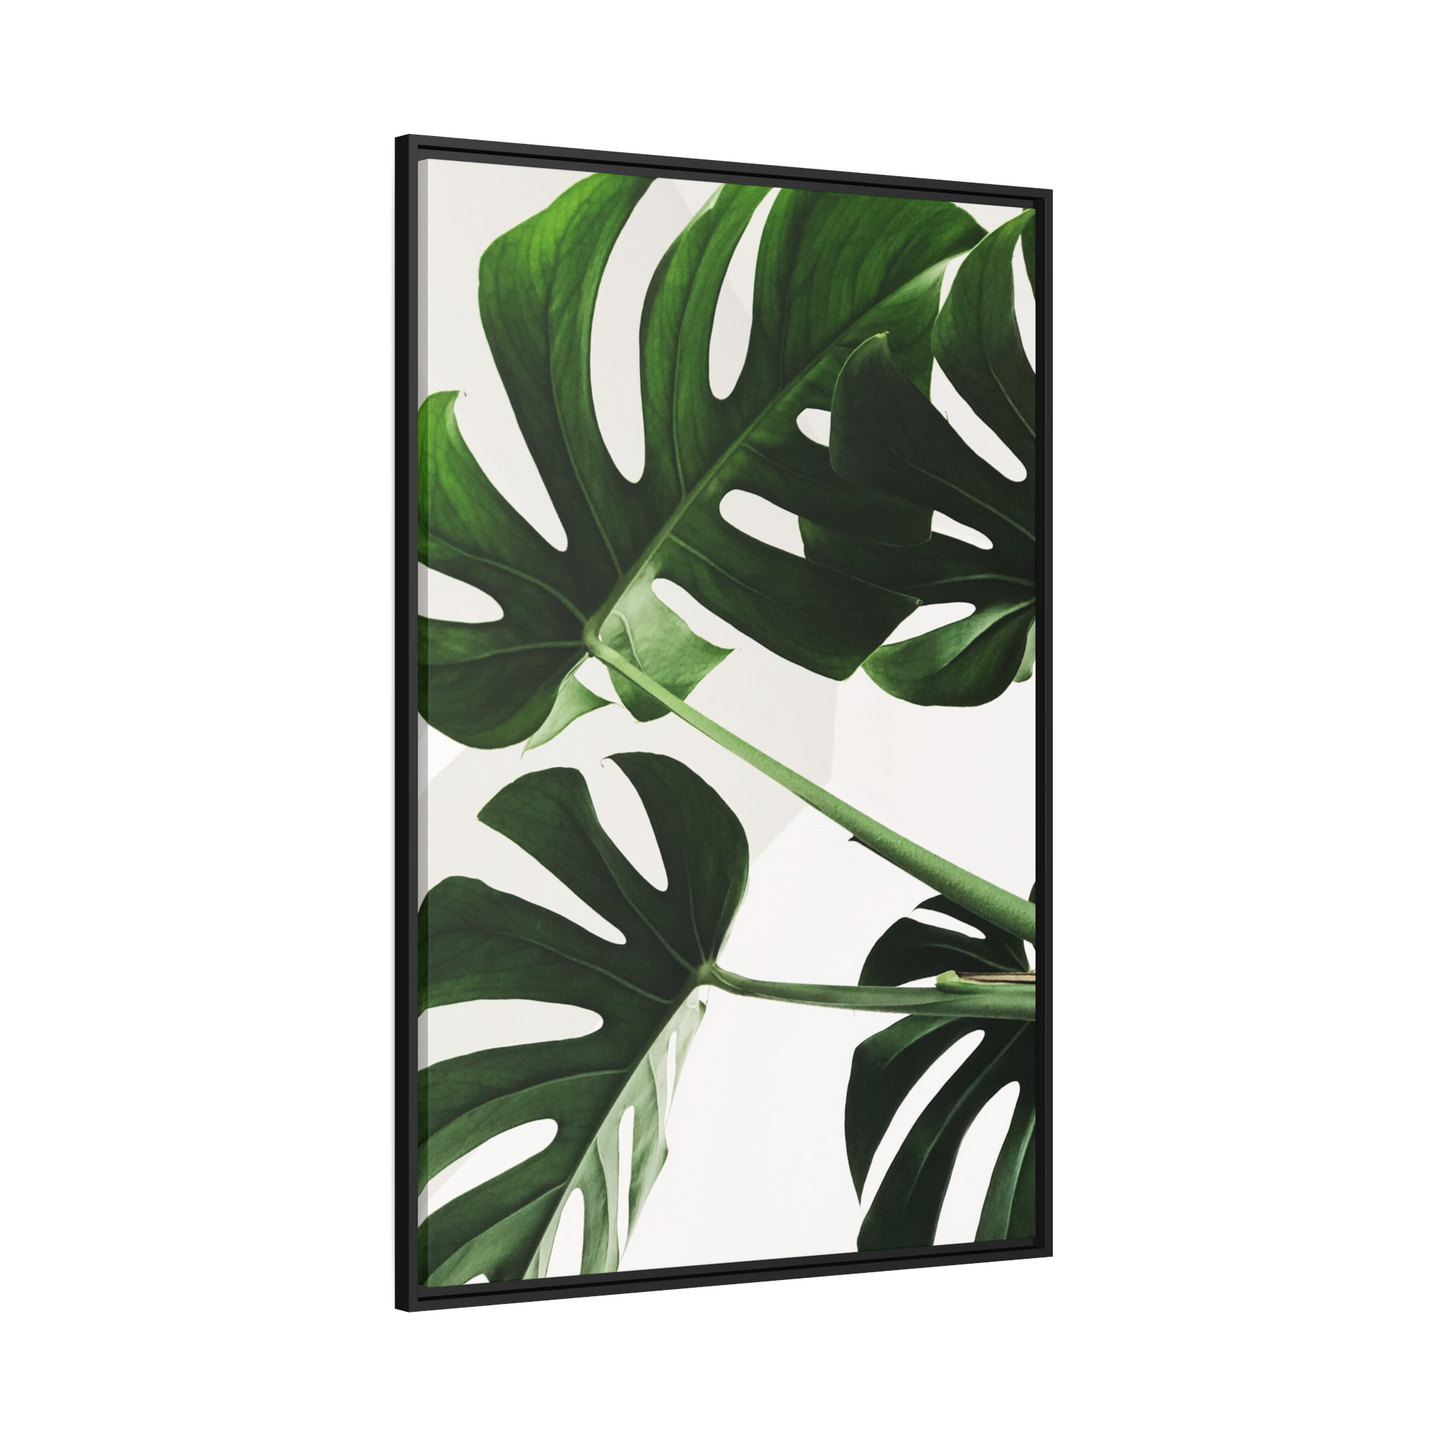 Framed Minimalism: Natural Canvas Art for a Chic Wall Decor